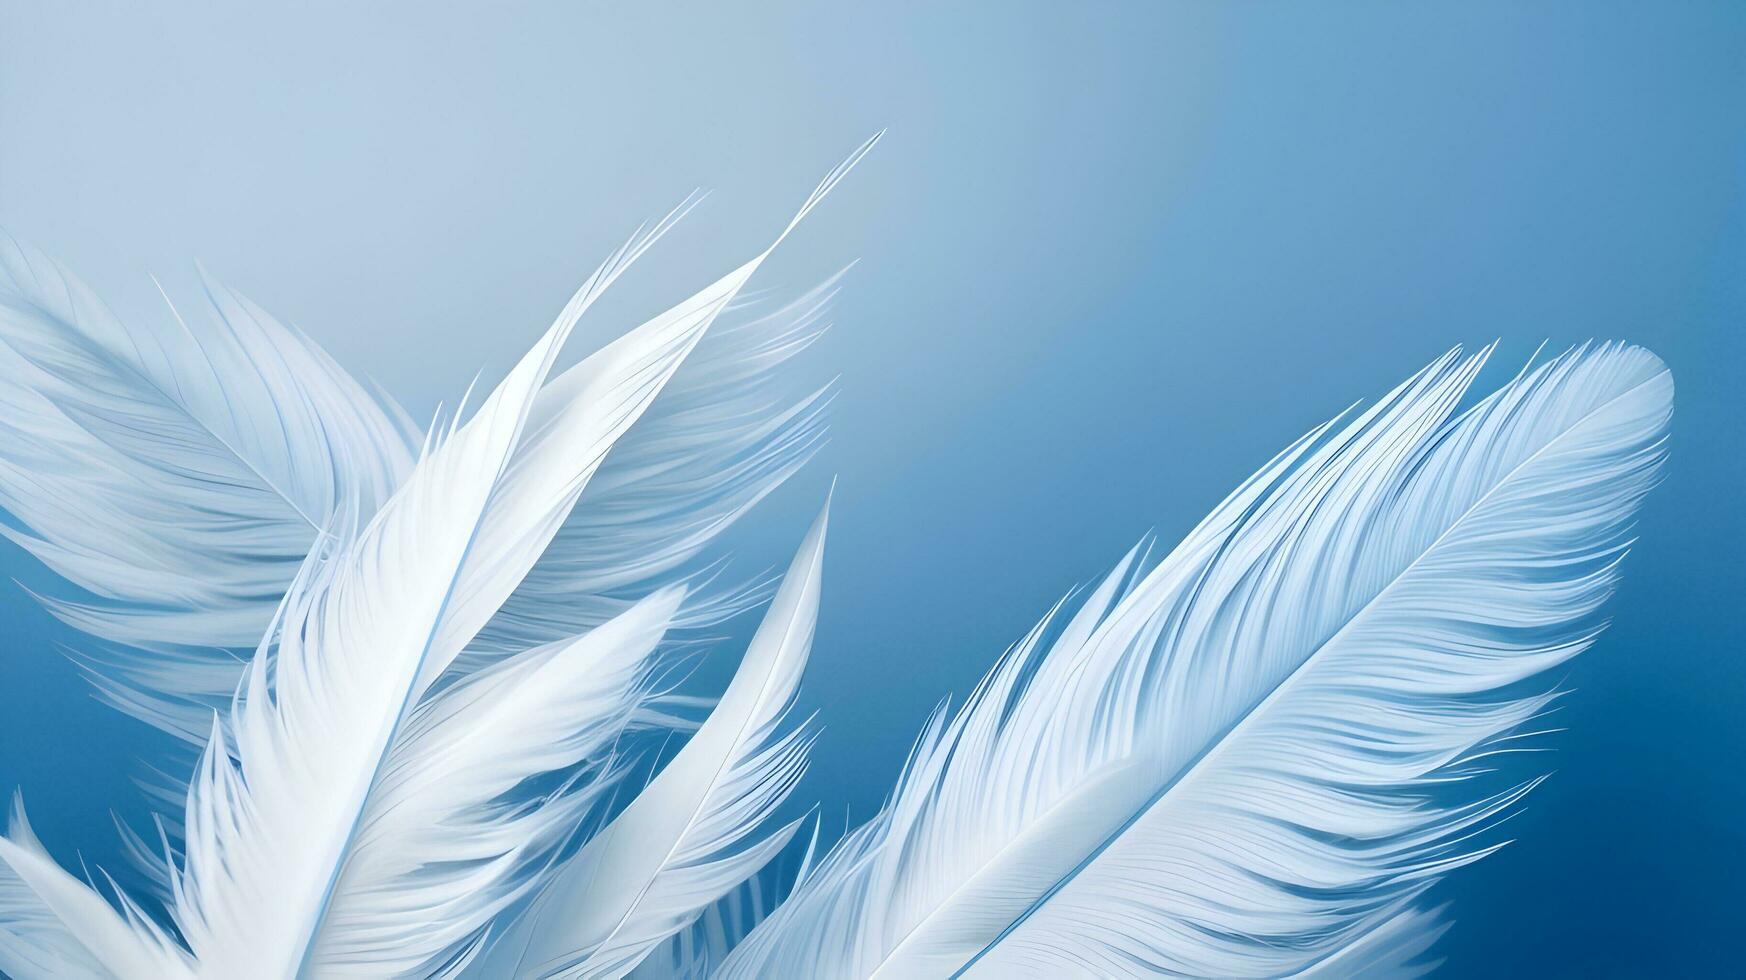 abstract soft focus background with a gentle blue color palette, emphasizing the softness and delicacy of bird feathers photo